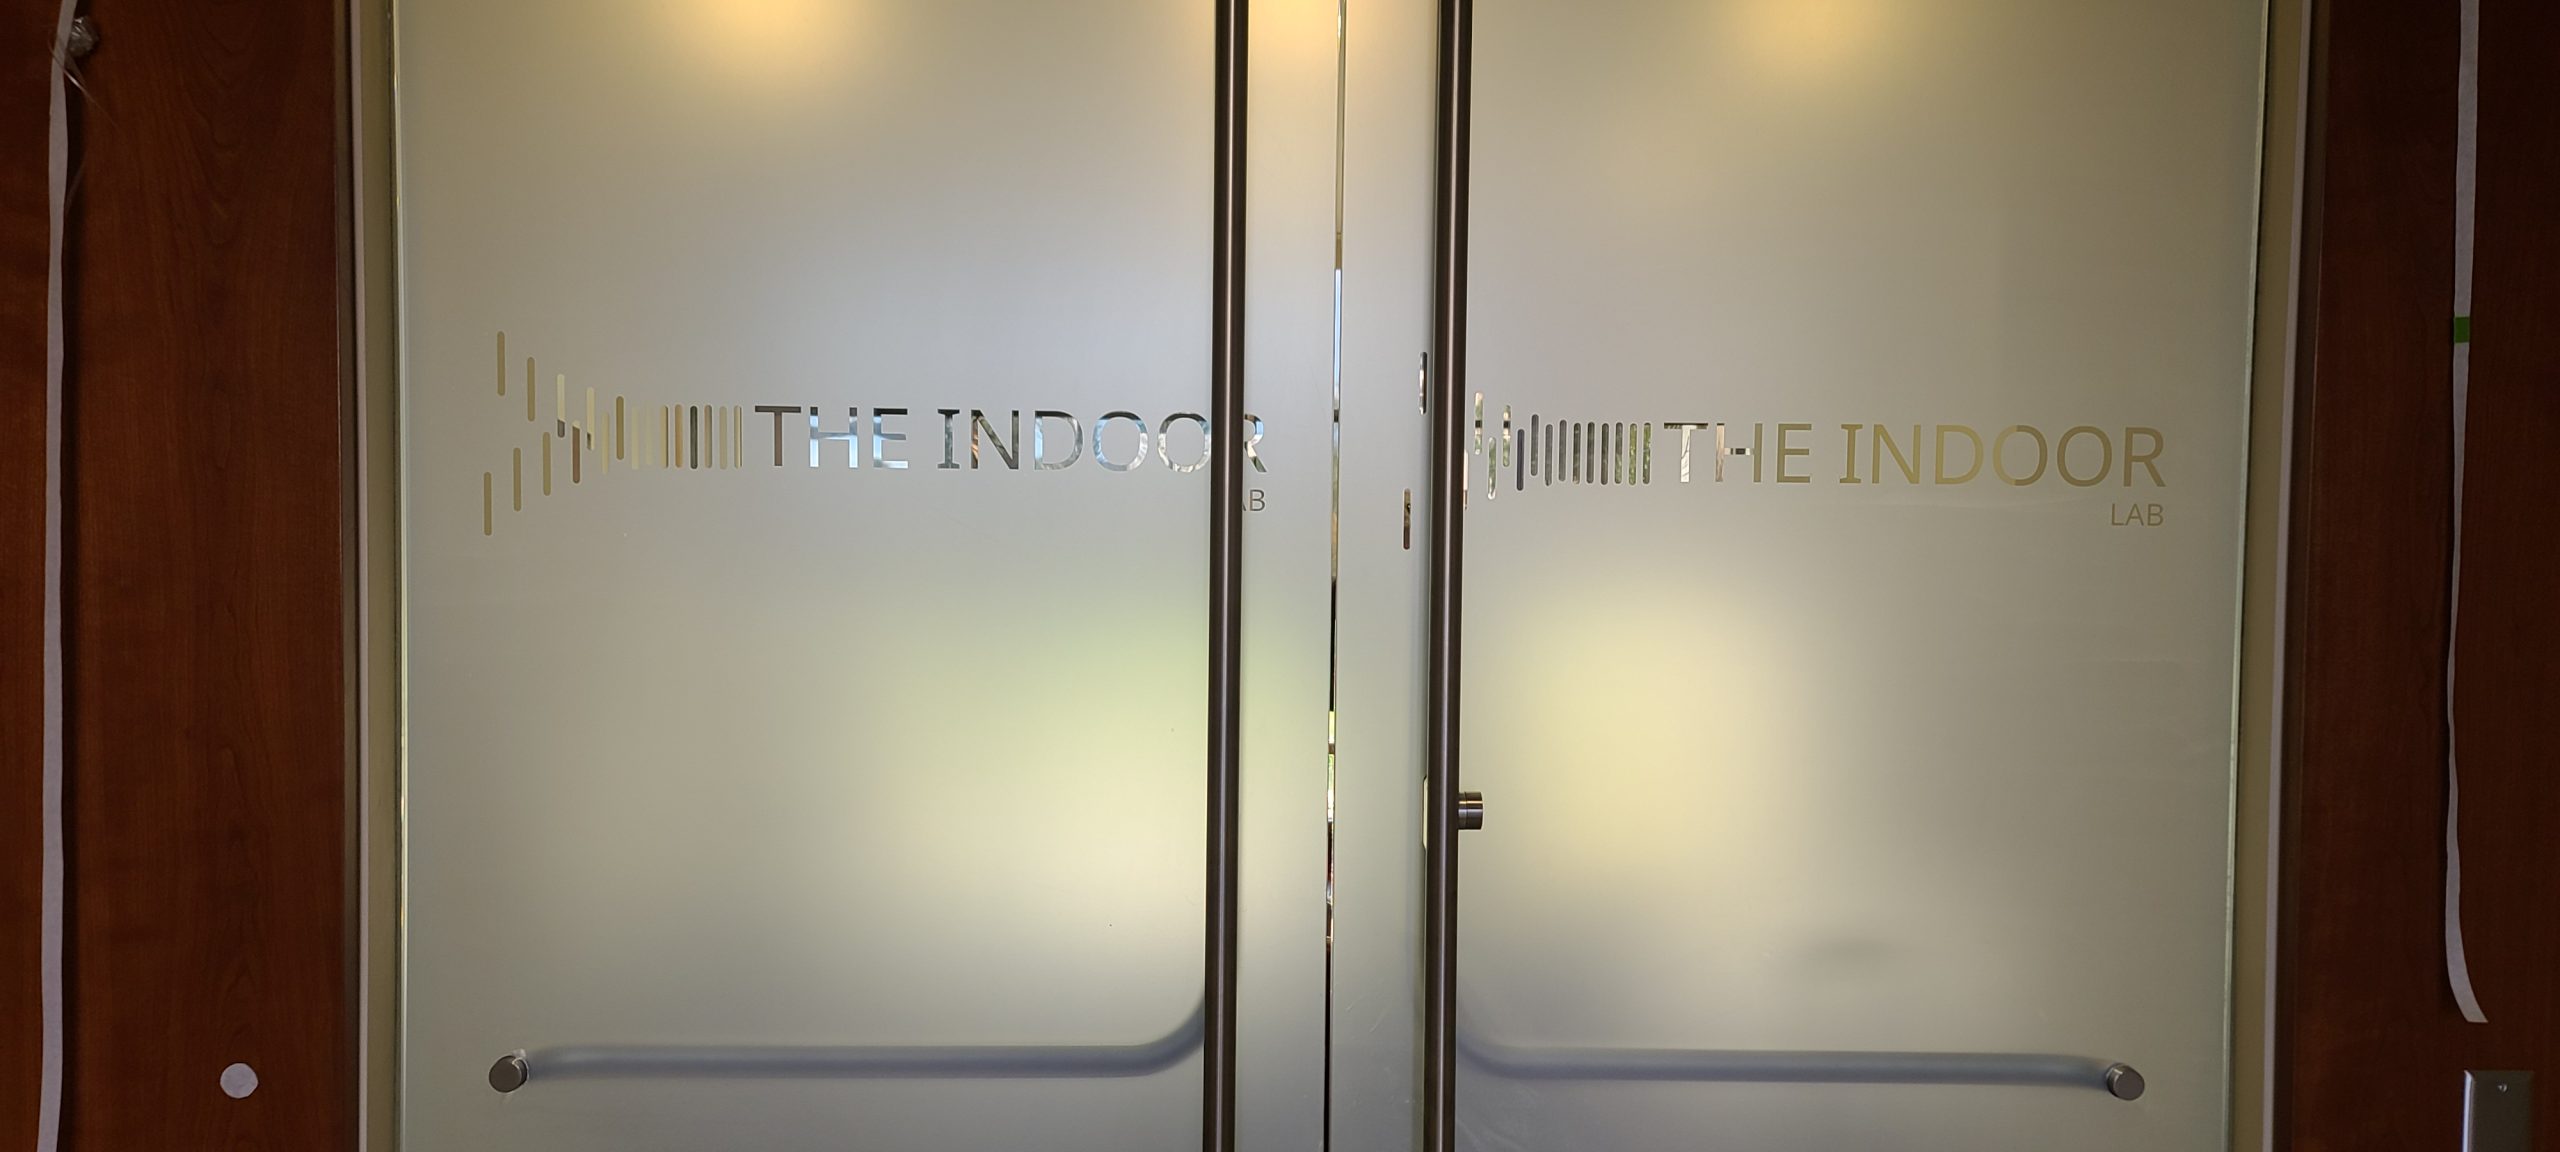 You are currently viewing Door Graphics for The Indoor Lab in Irvine